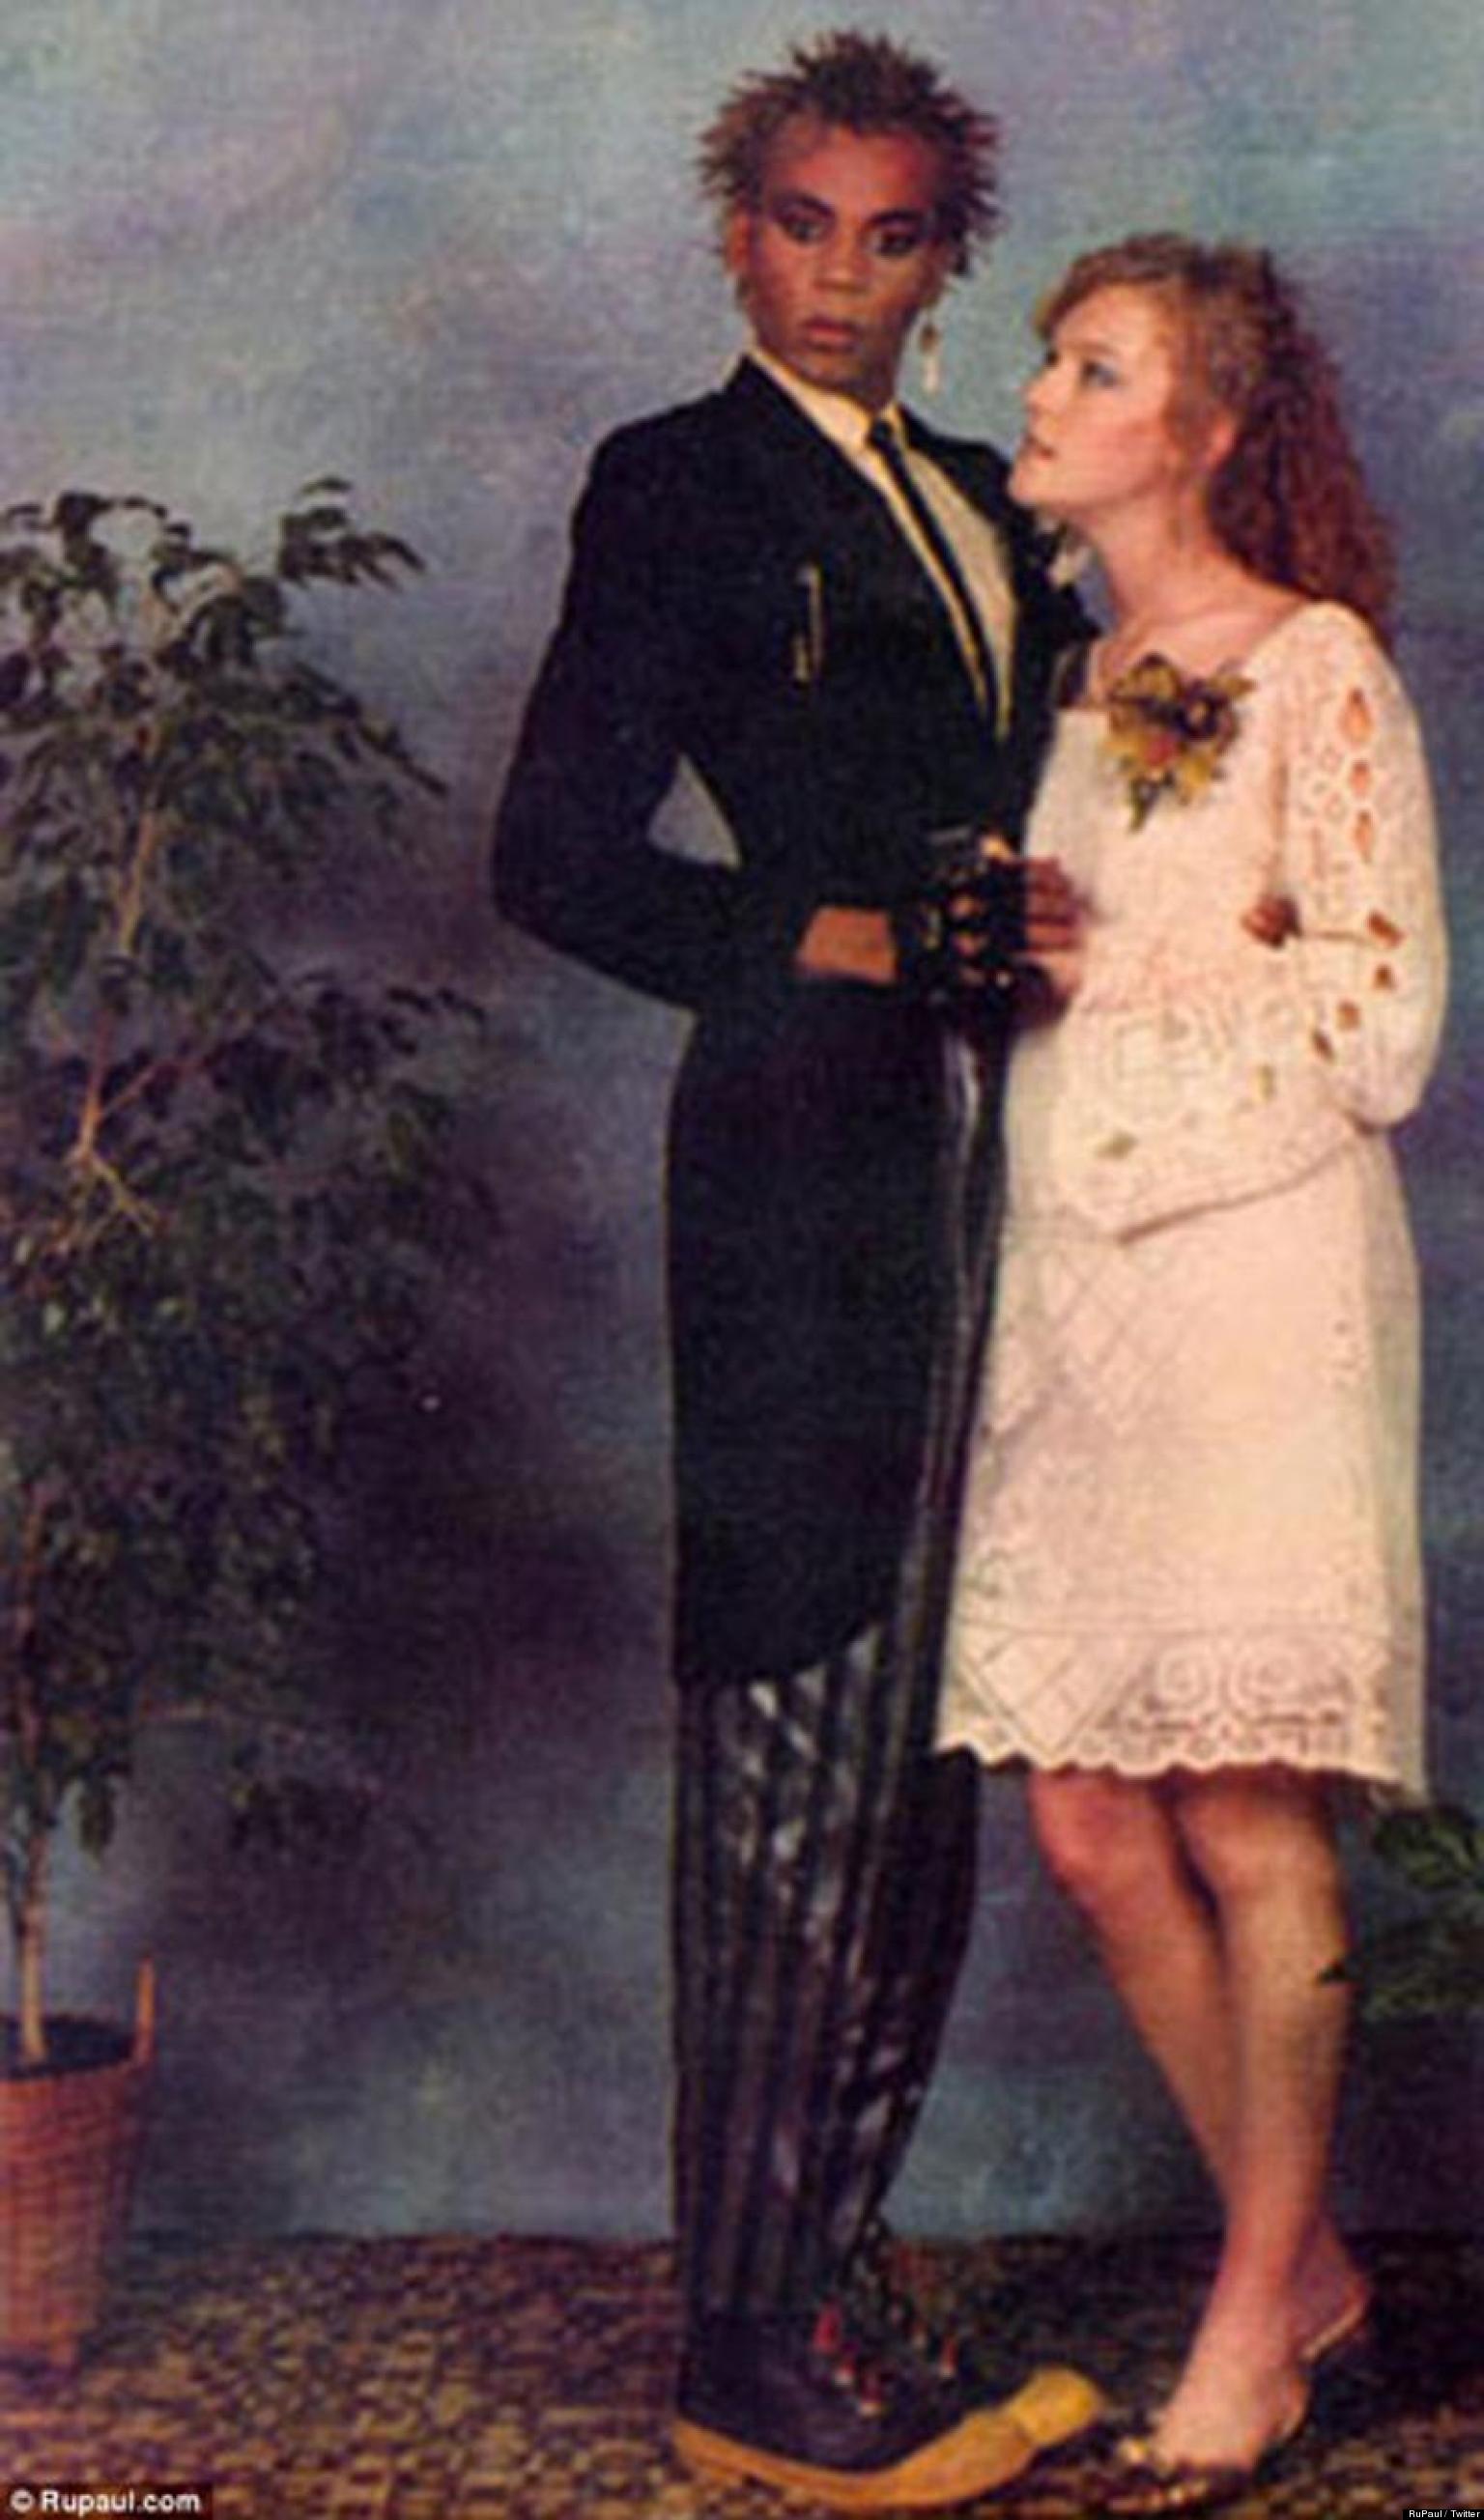 RuPaul's Prom Picture Shows Drag Queen Had It Going On Even In High School